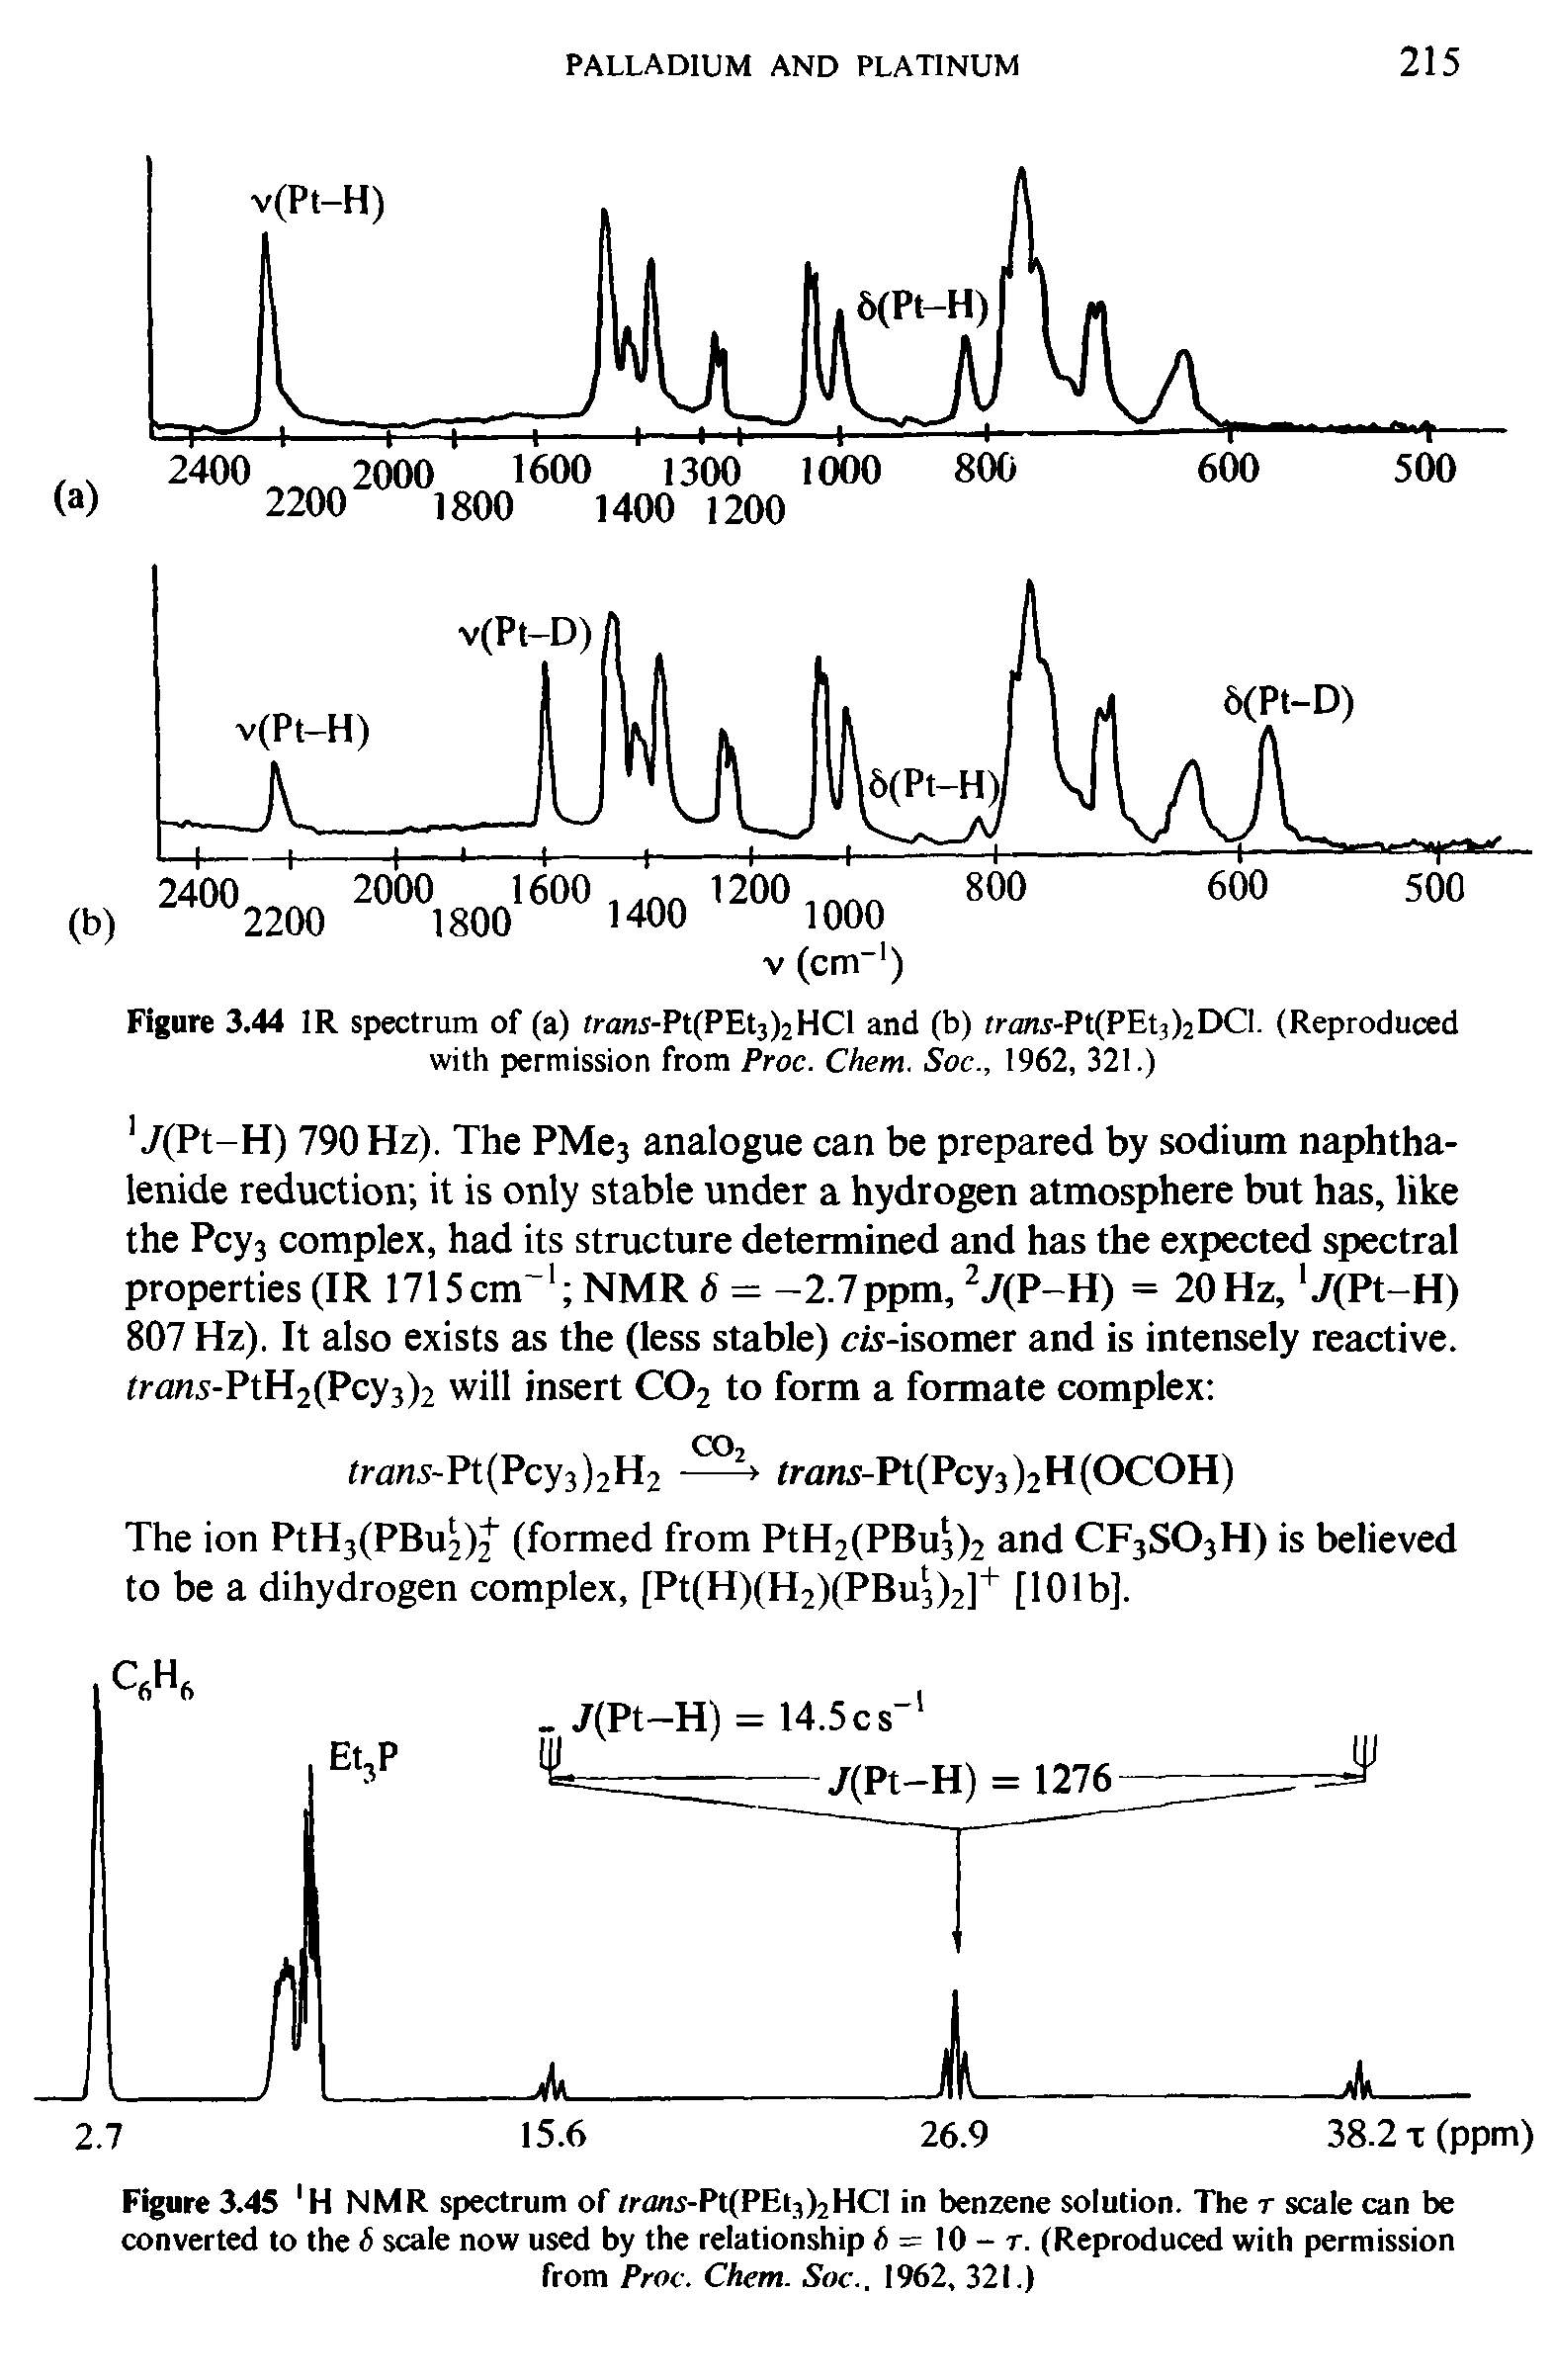 Figure 3.45 H NMR spectrum of trani-Pt(PEl3)2HCl in benzene solution. The t scale can be converted to the 6 scale now used by the relationship b = 10 - t. (Reproduced with permission from Proc. Chem. Soc.. 1962, 321.)...